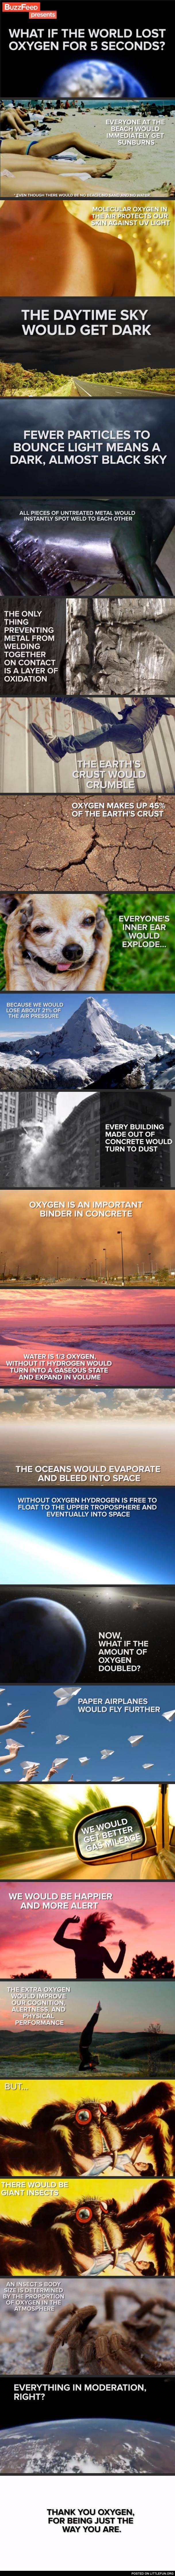 What if the world lost oxygen for 5 seconds?